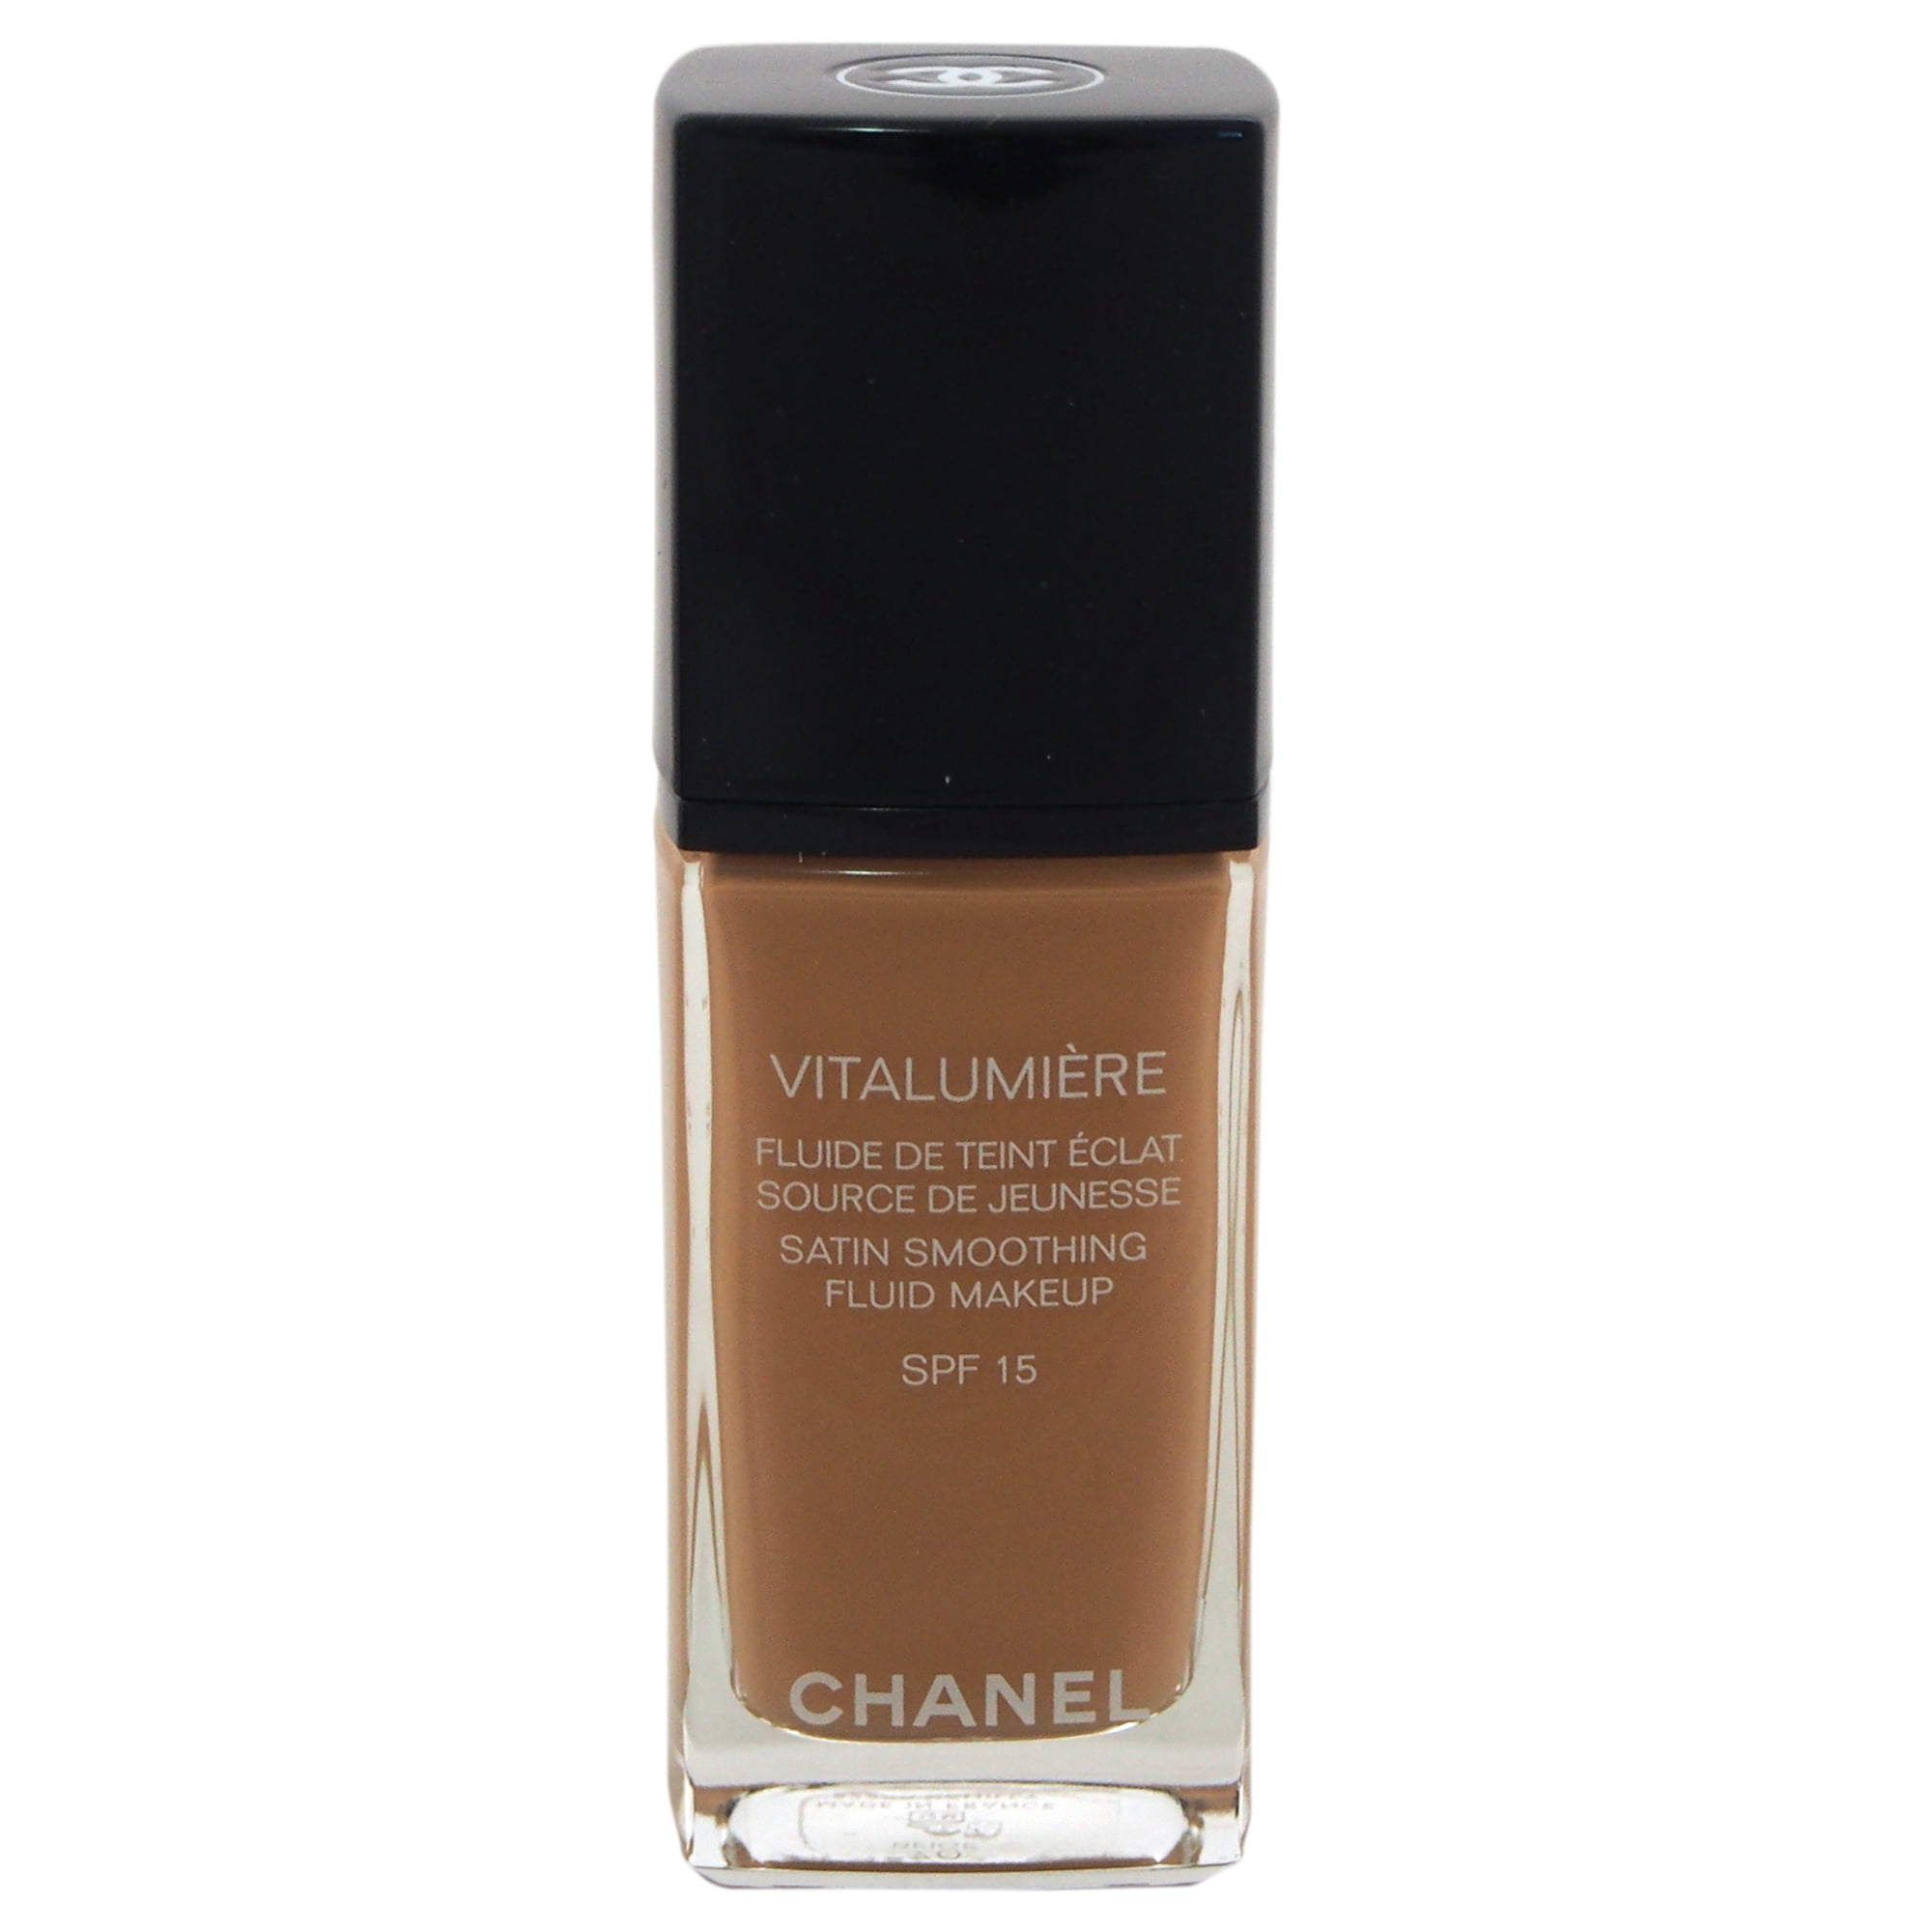 Chanel Vitalumiere Fluide Makeup SPF 15 - # 20 Clair by Chanel for